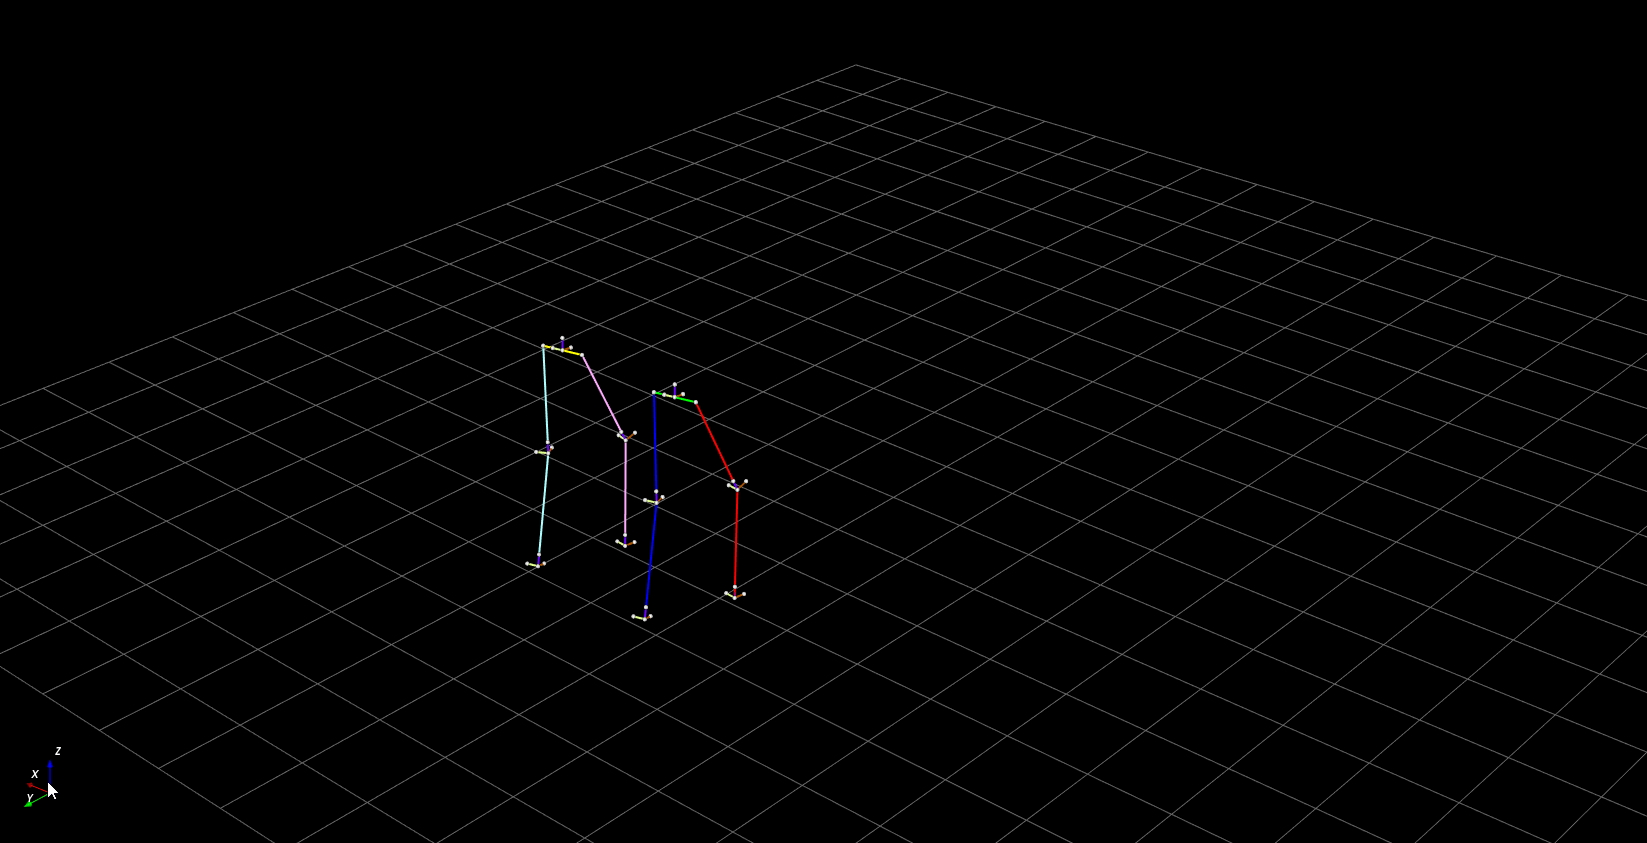 Sample Reconstruction for walking motion (Left = benchmark/Vicon, Right = my reconstruction)